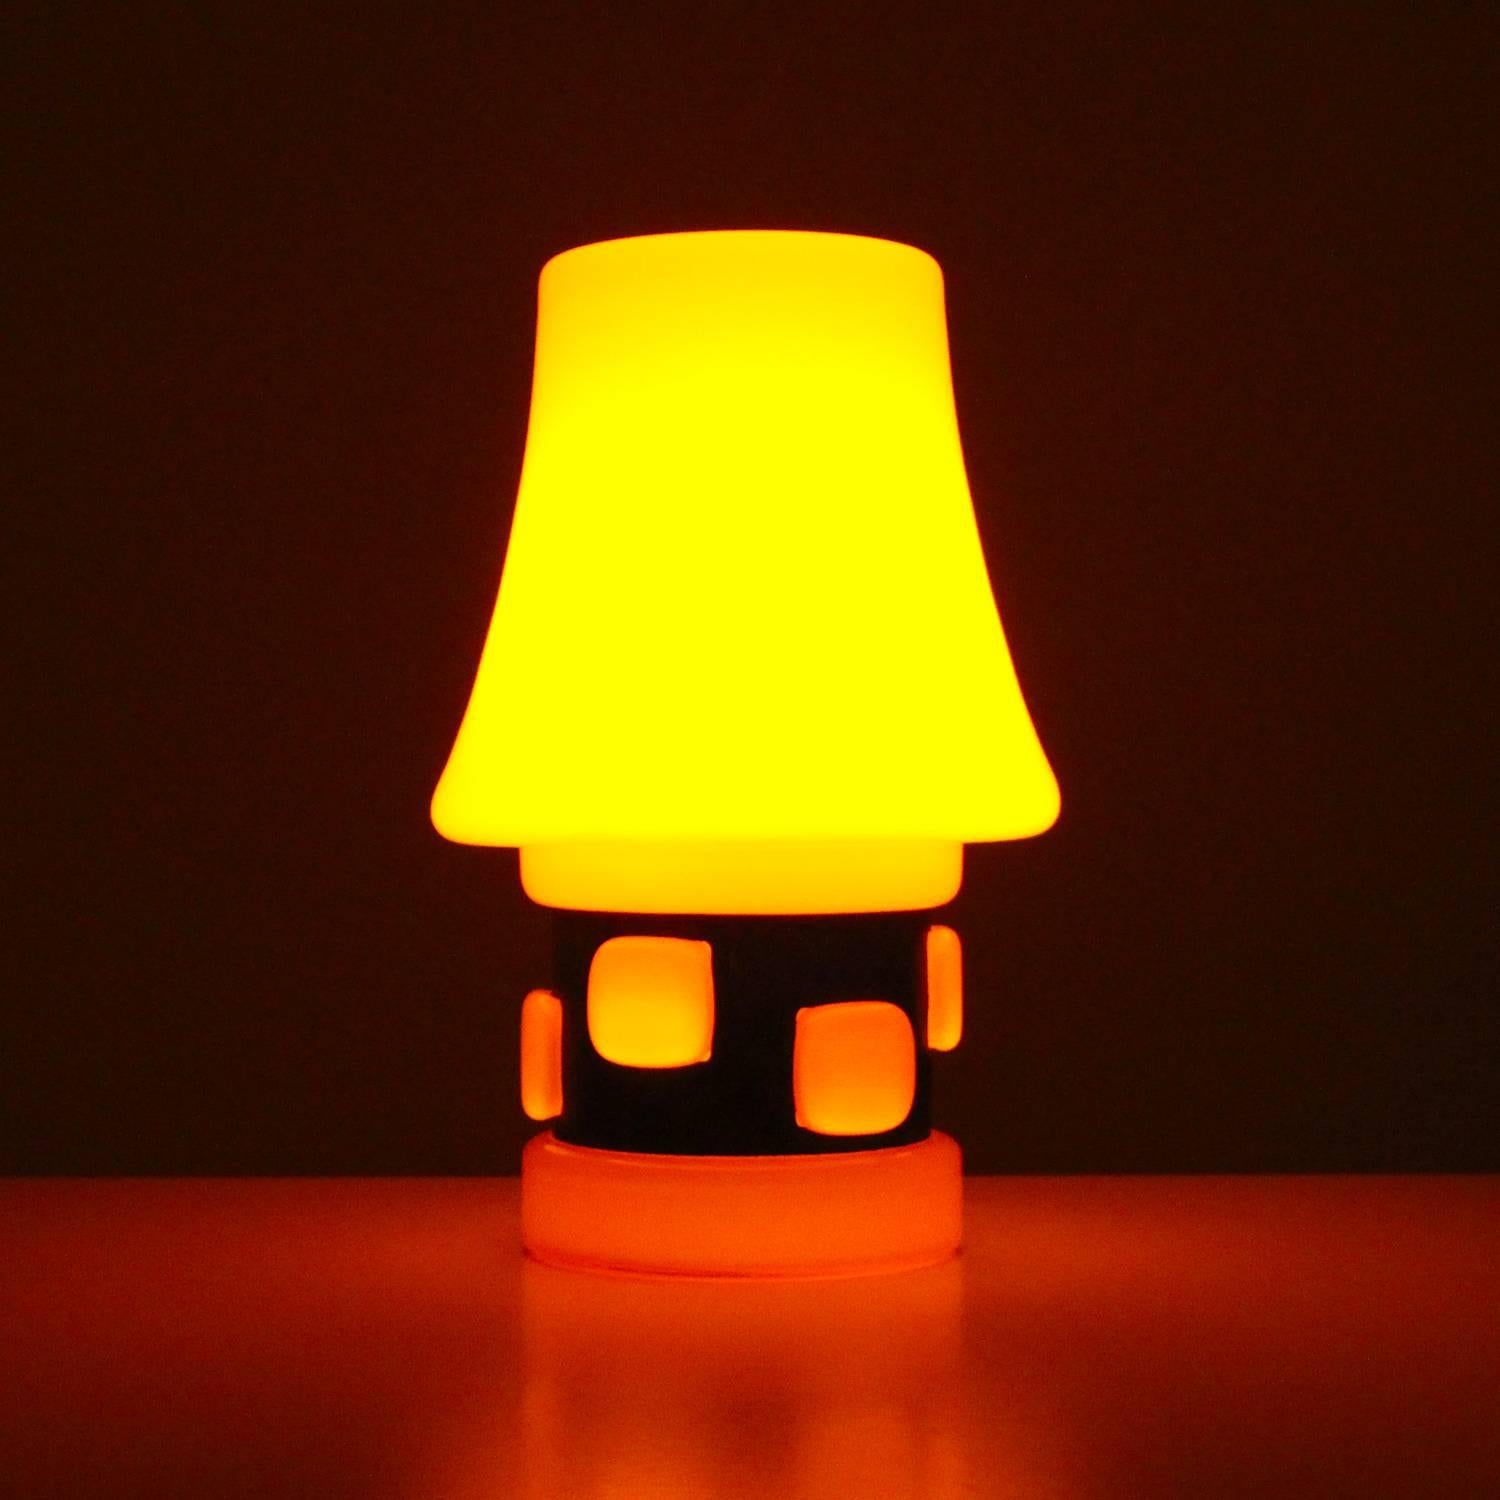 Orange table lamp by Danish lighting producer BA in the 1970s, fun and playful bright orange glass table light with dark gray metal in excellent vintage condition.

A very charming table lamp made up of bright orange glass with a dark gray metal